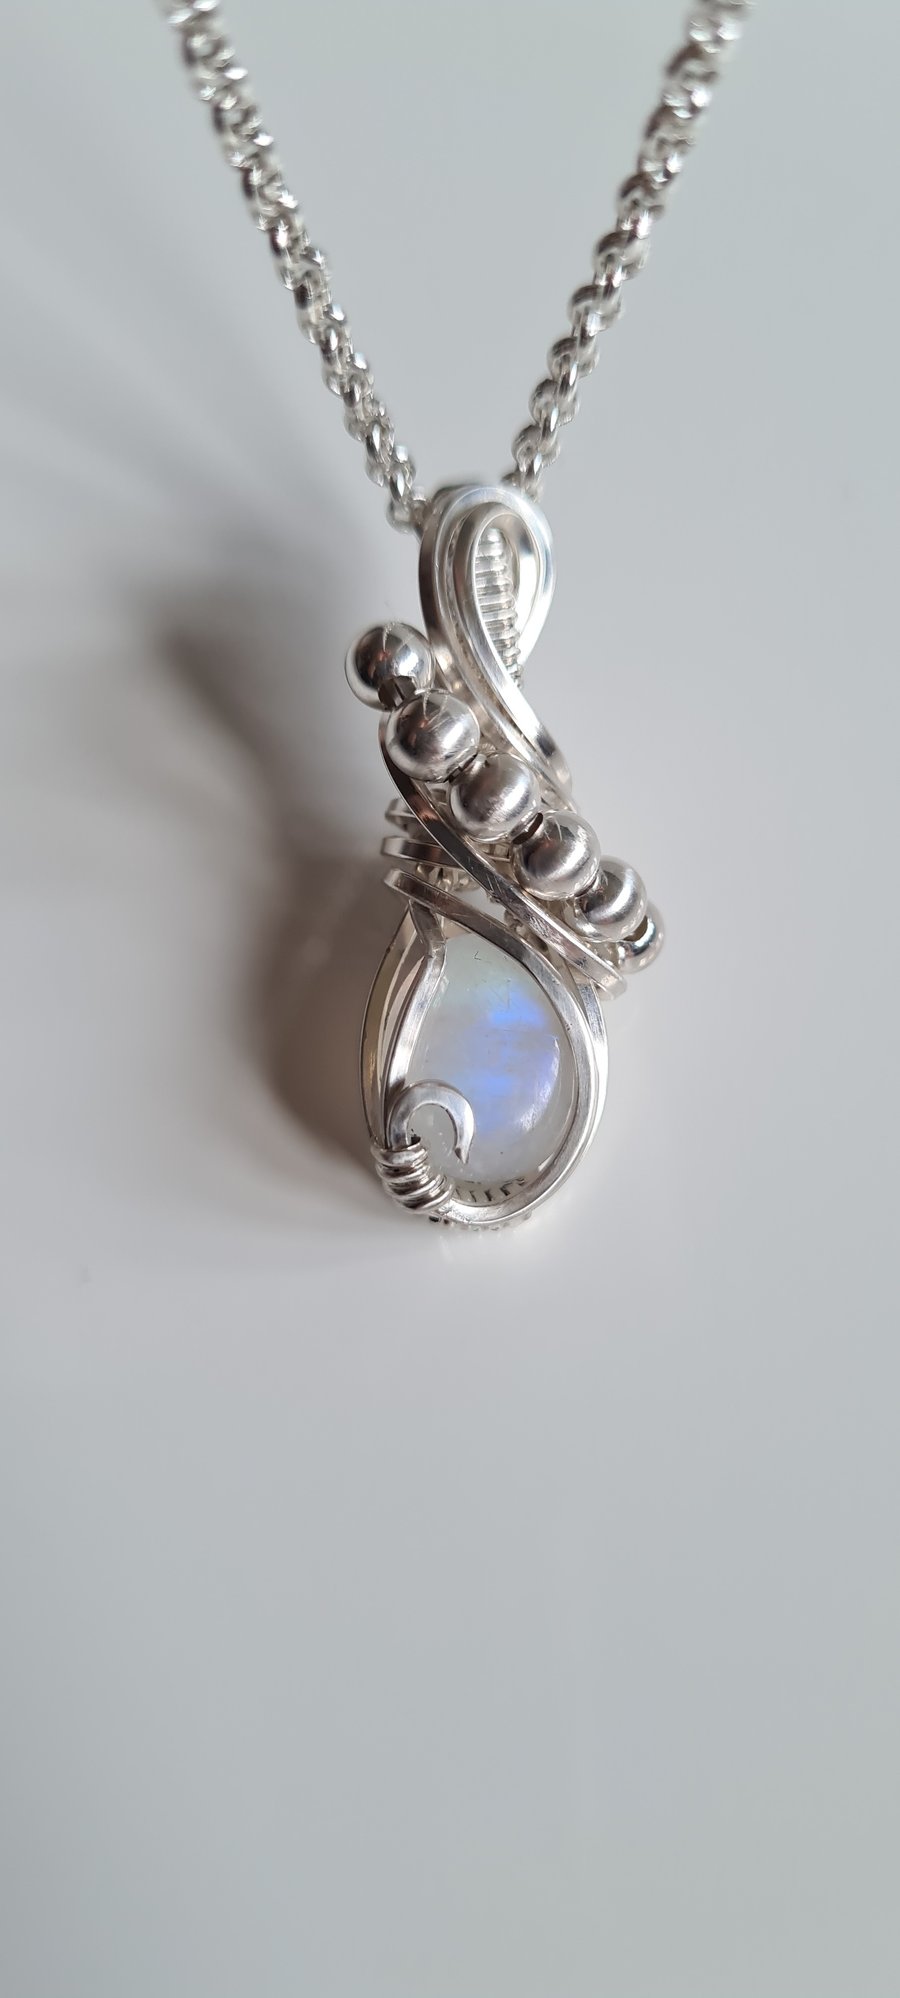 Handmade 925 Silver & Natural Rainbow Moonstone Necklace Gift Crystal Jewellery